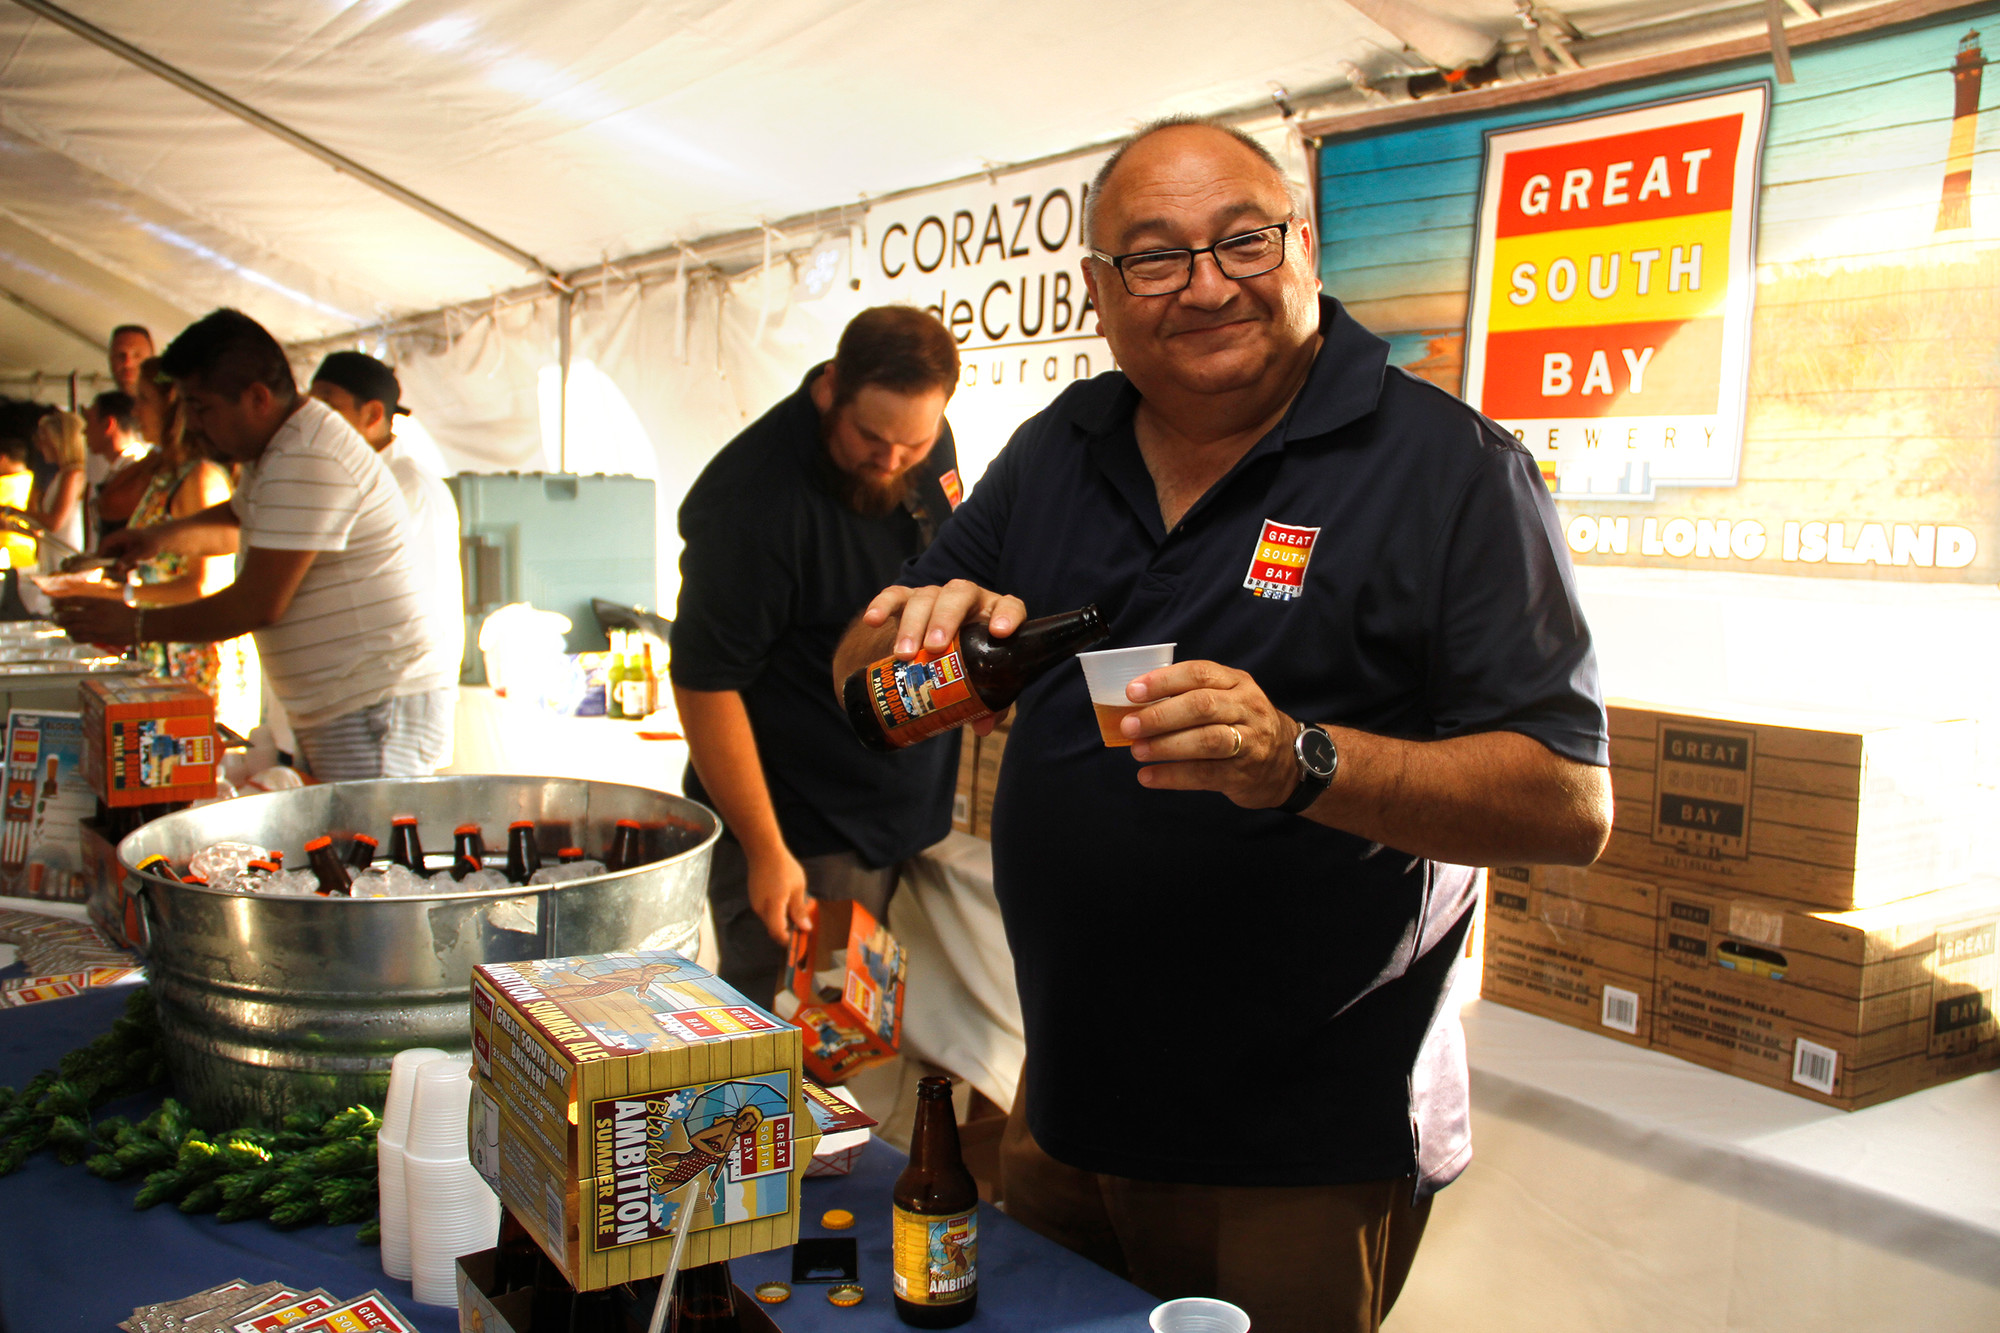 Phil Ebel of the Great South Bay Brewery poured samples of their brew.